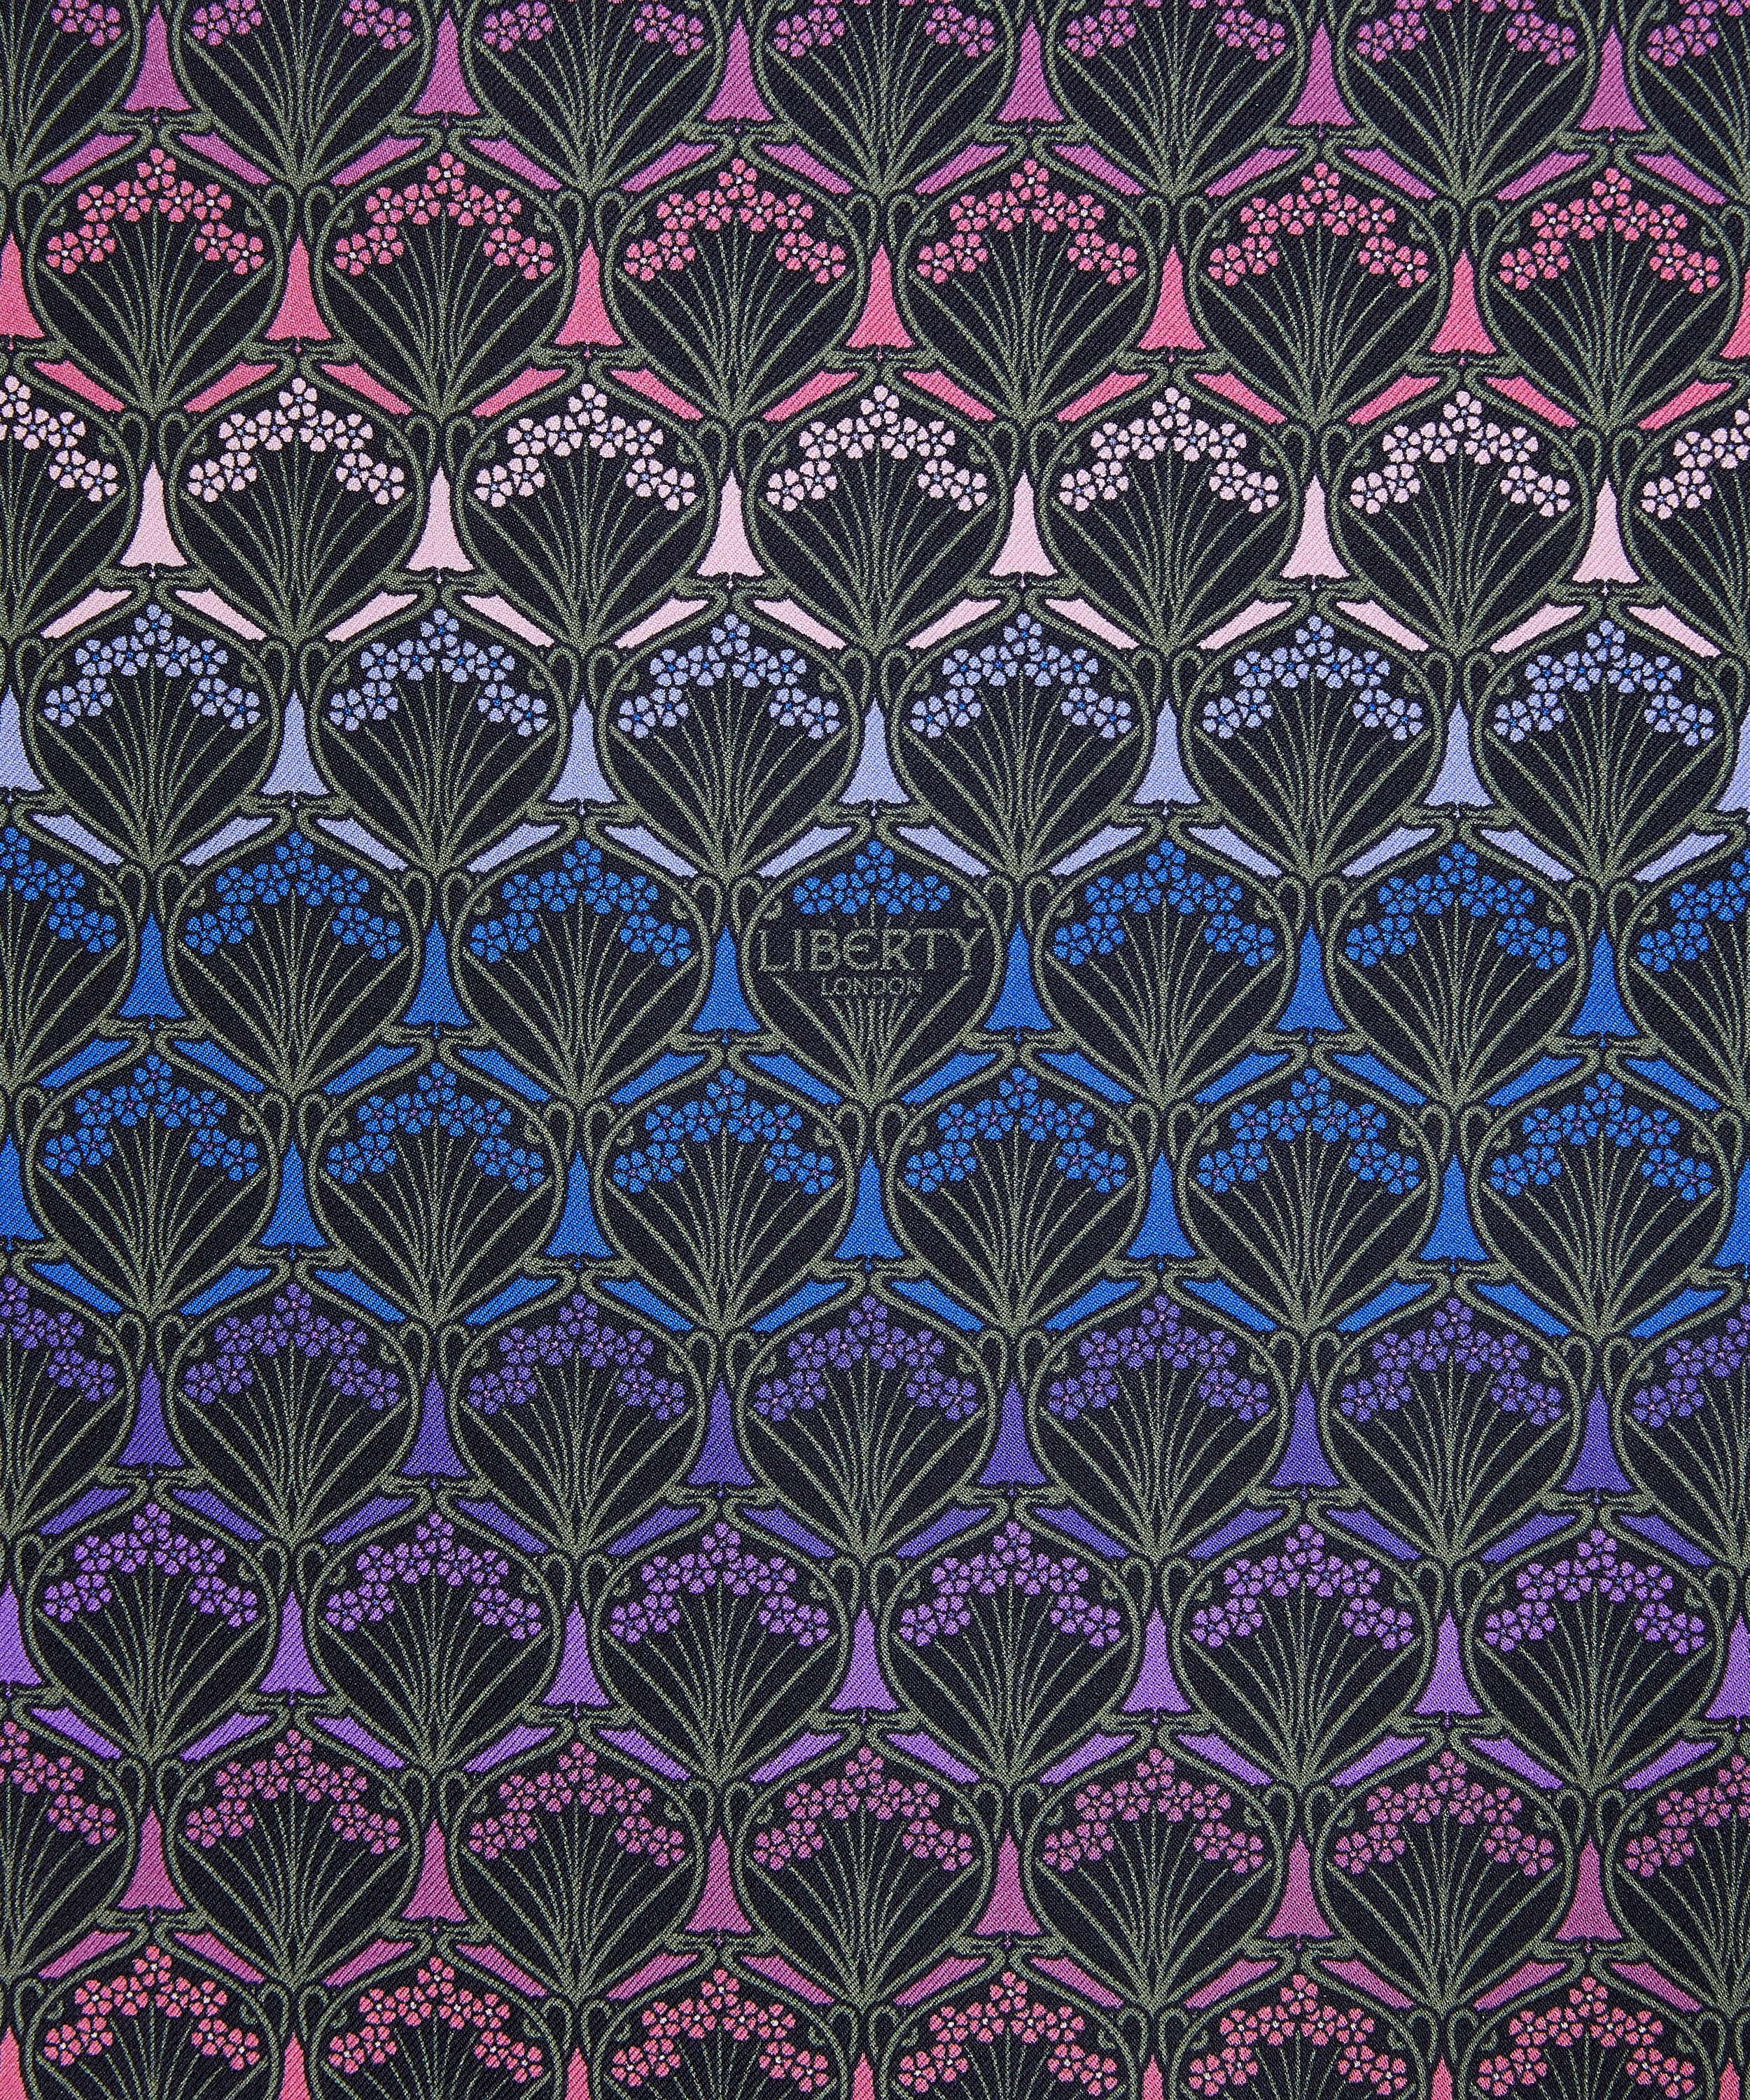 Liberty - Dusk Iphis 45 x 45cm Silk Twill Scarf image number 2